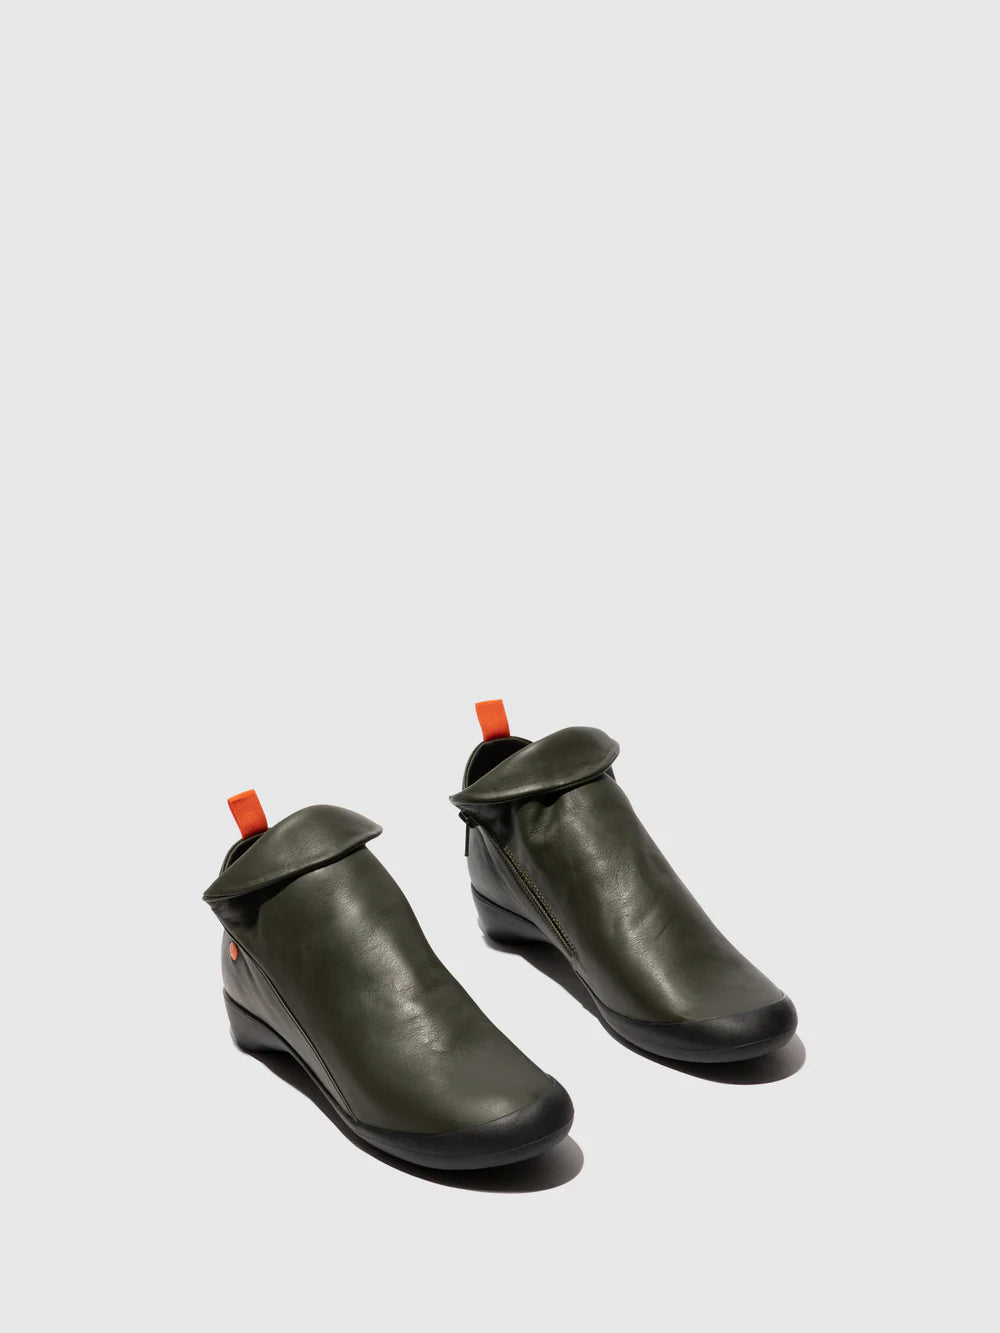 Softinos Farah military leather side zip boot